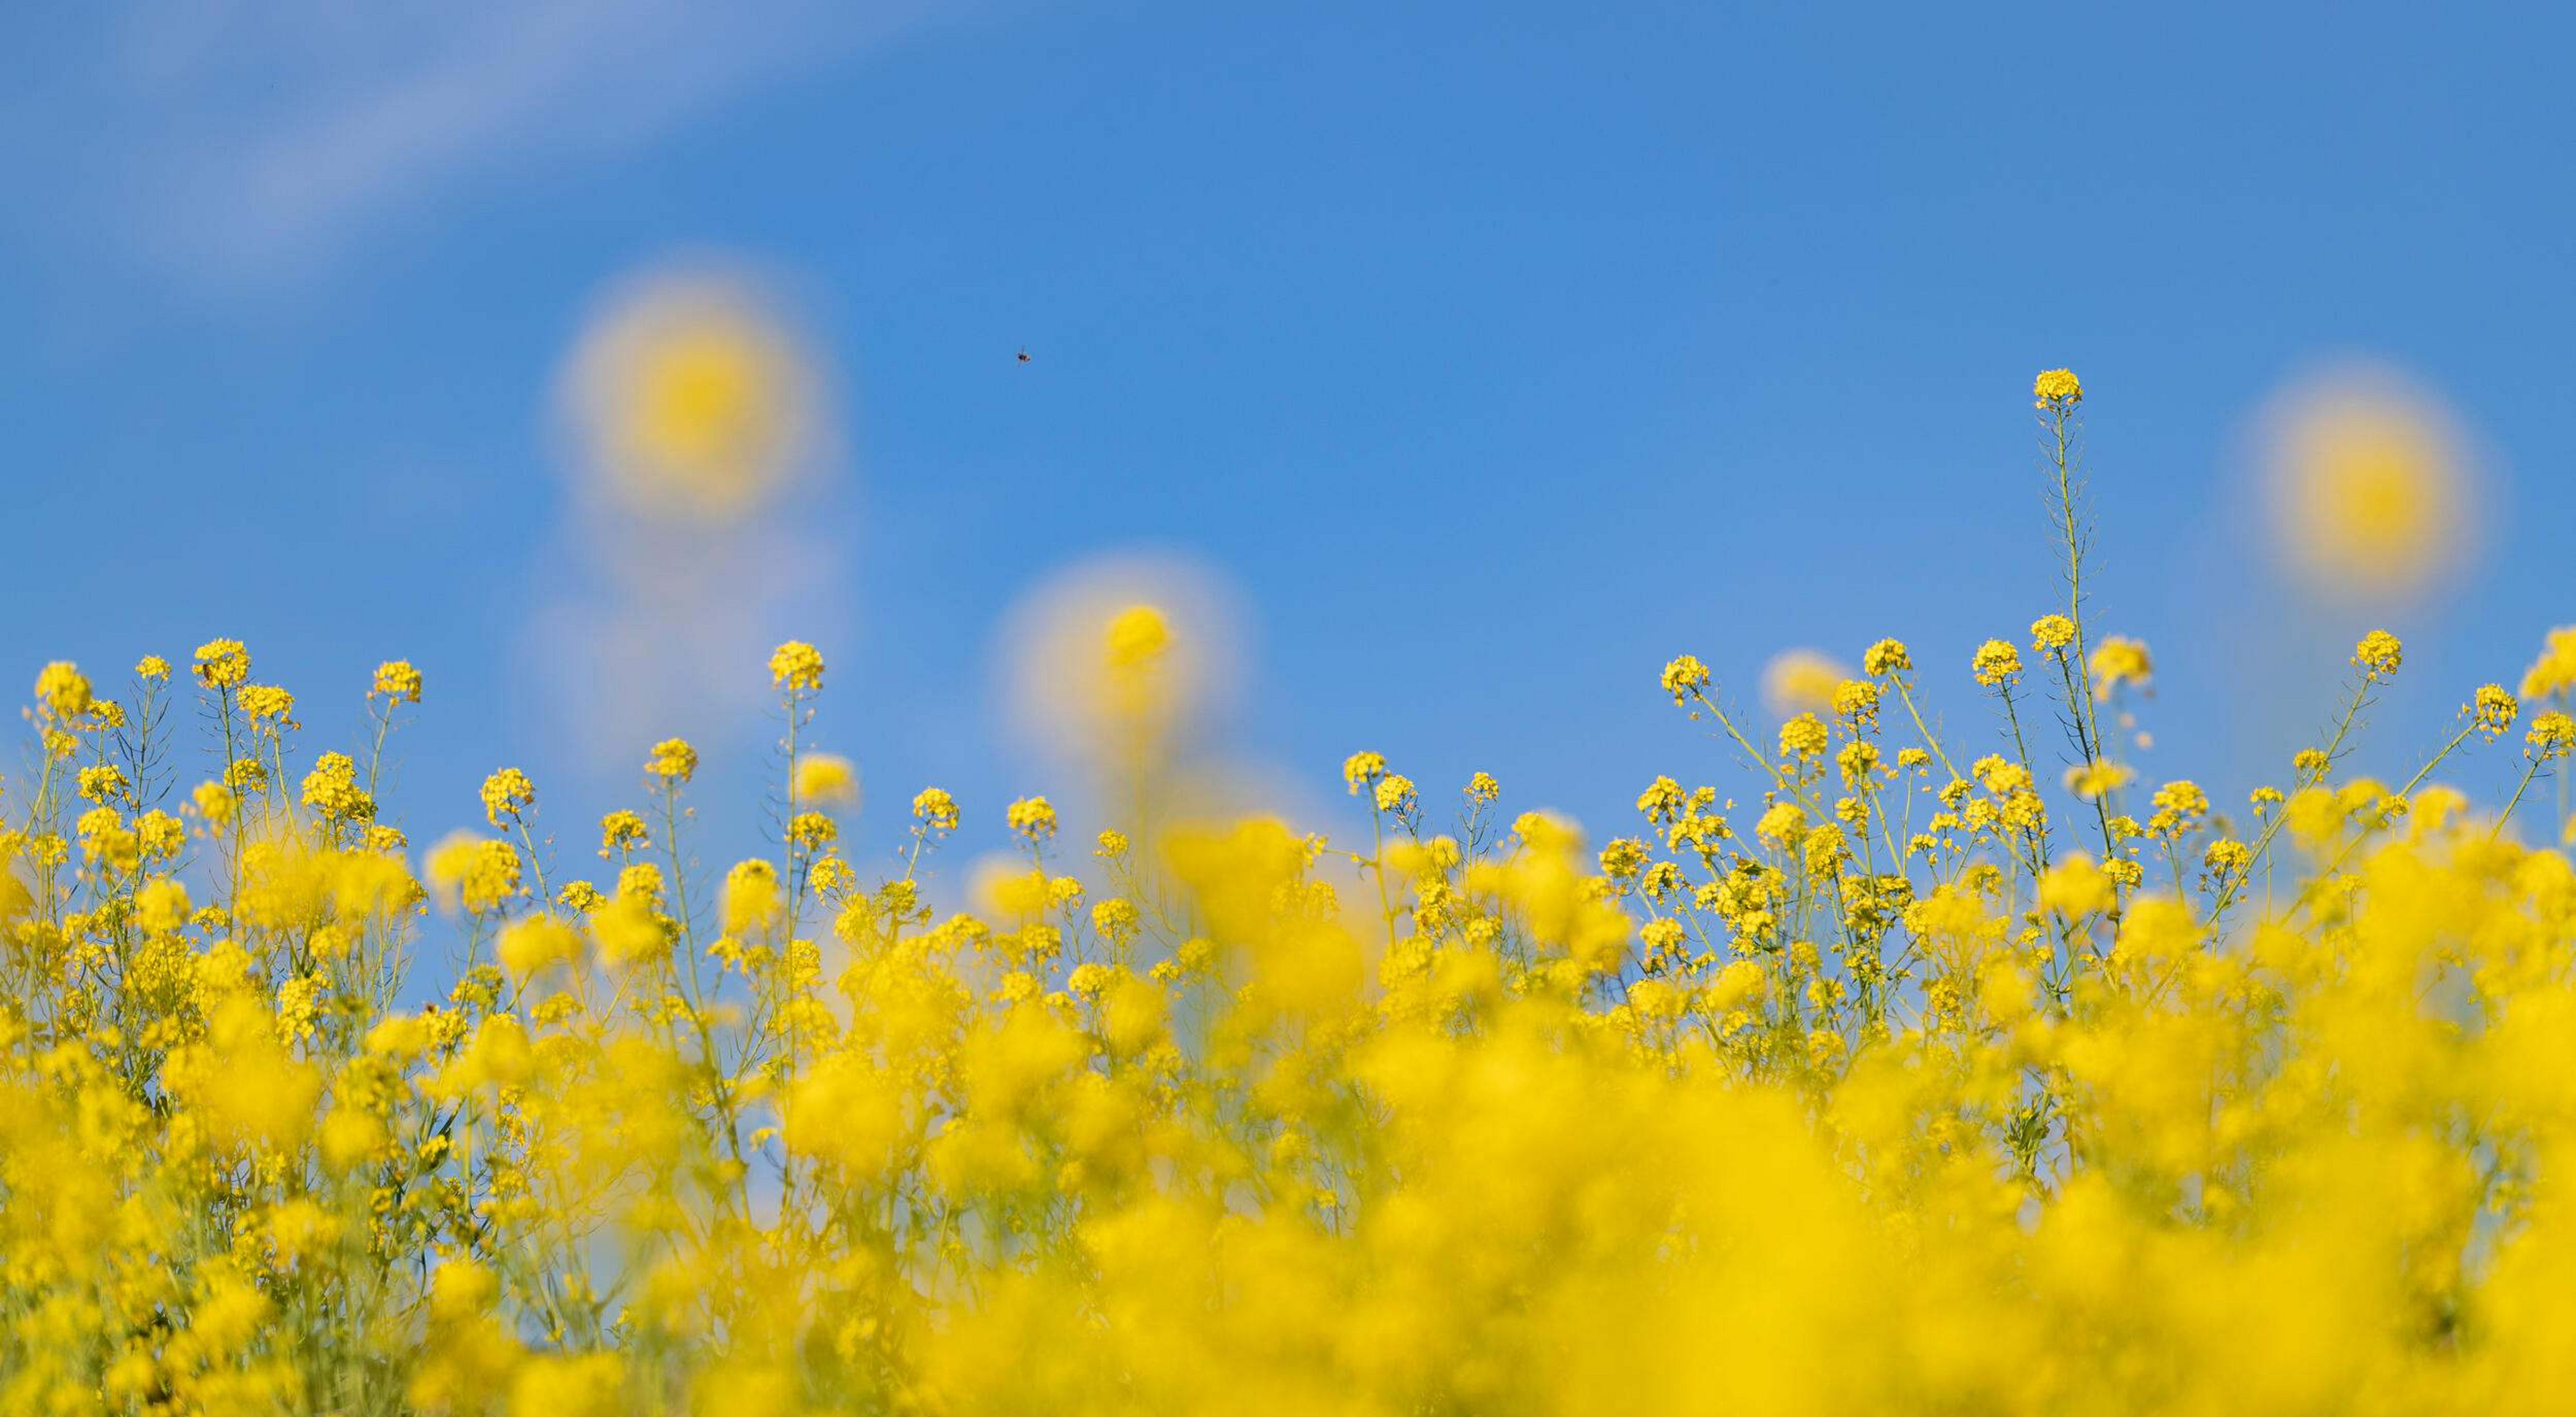 an eye-level view of a field of yellow flowers against a blue sky.